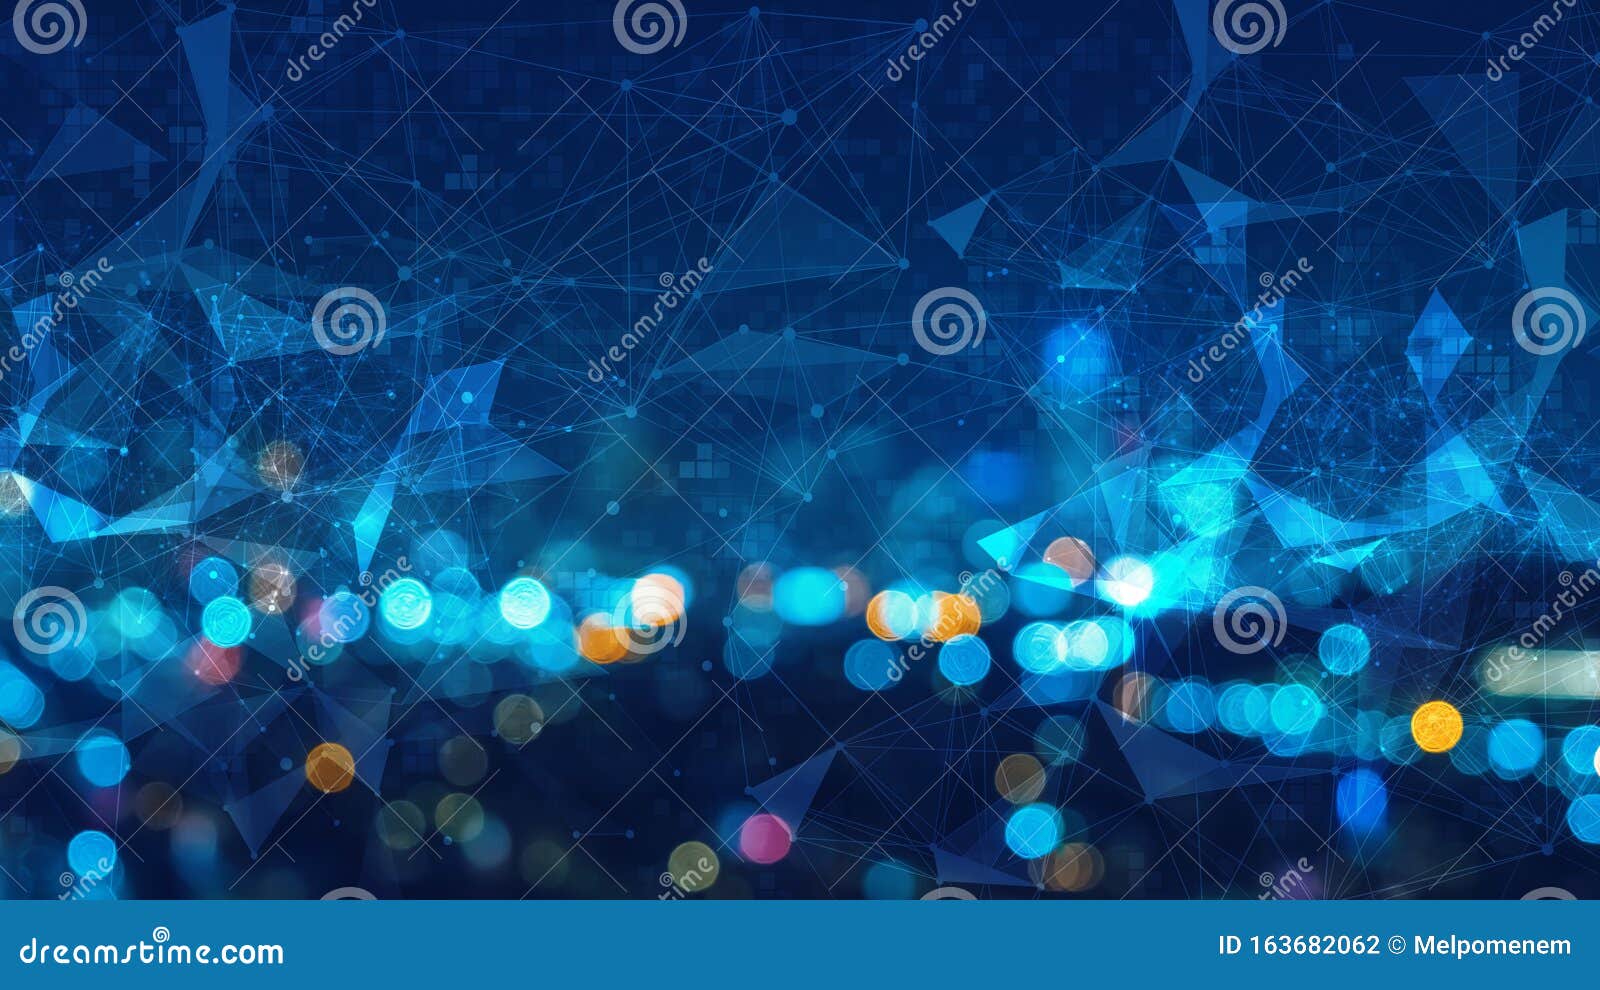 connectivity concept with blurred city lights